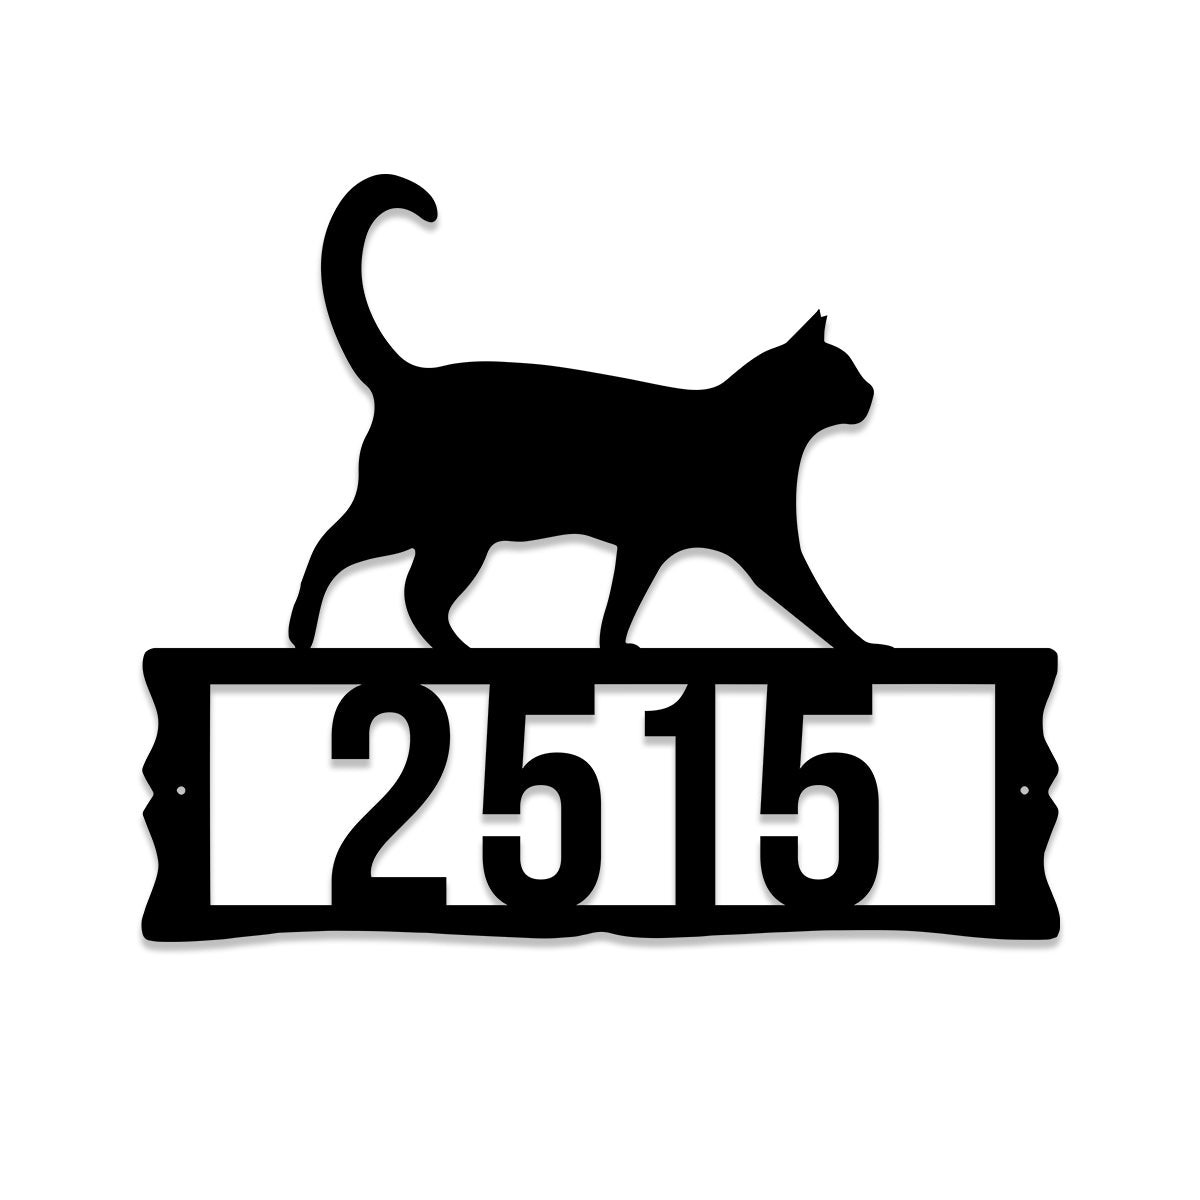 Personalized Address Cat Metal Sign, Wedding, Anniversary Gift For Cat Lovers, Metal Laser Cut Metal Signs Custom Gift Ideas 12x12IN